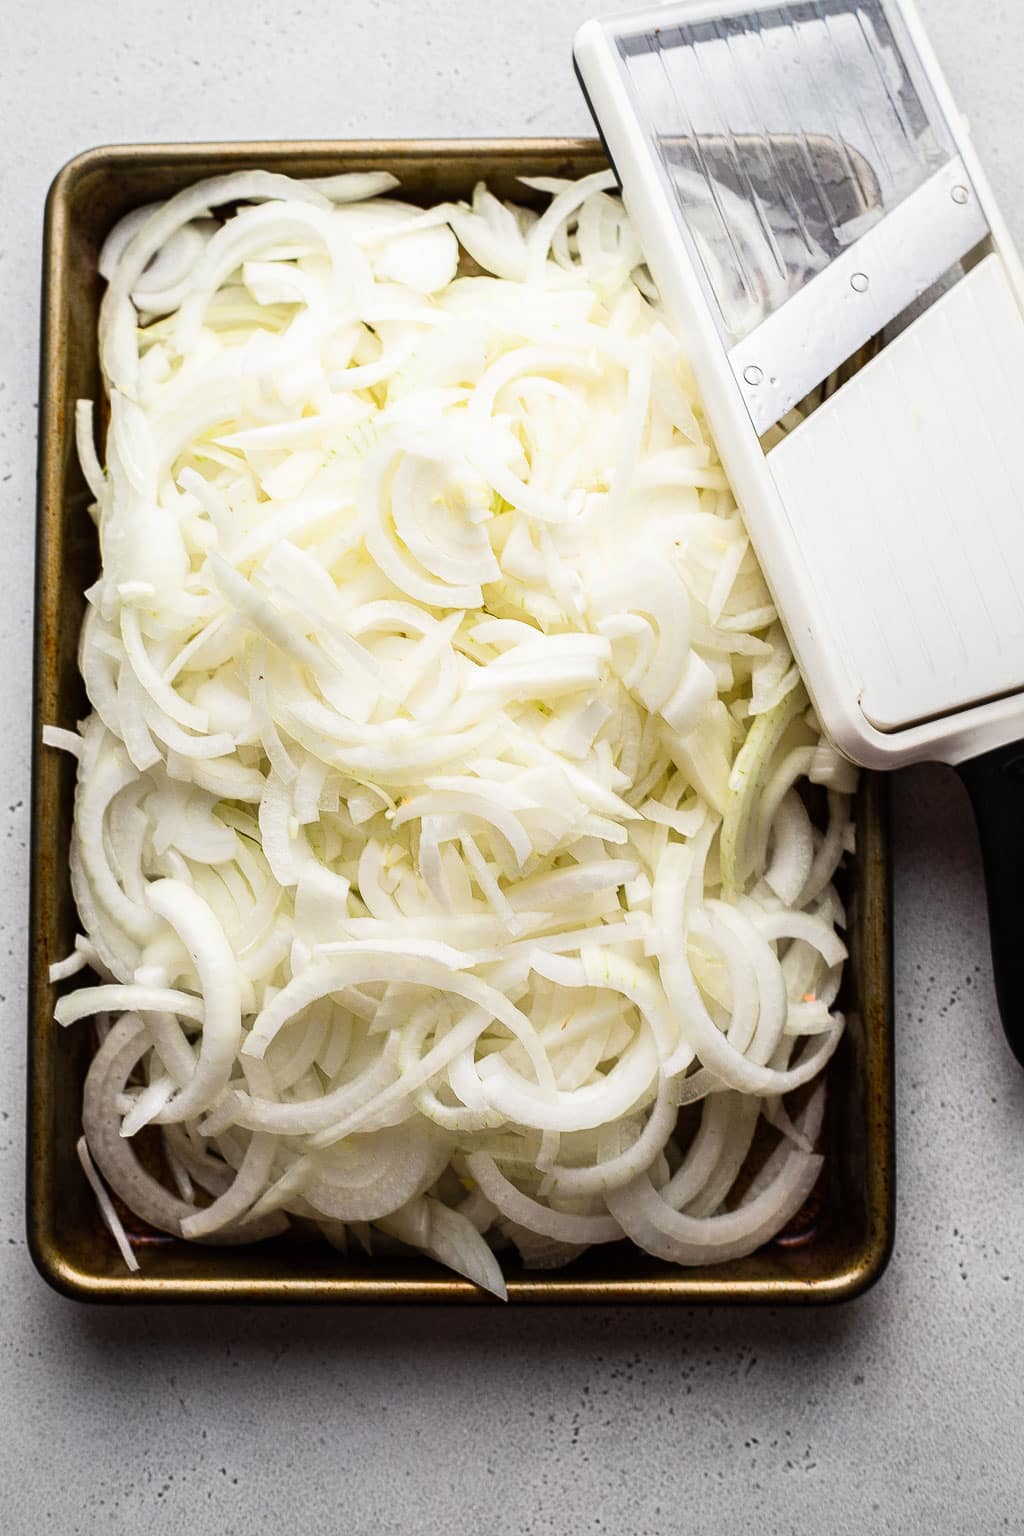 Thinly sliced onions before caramelizing.